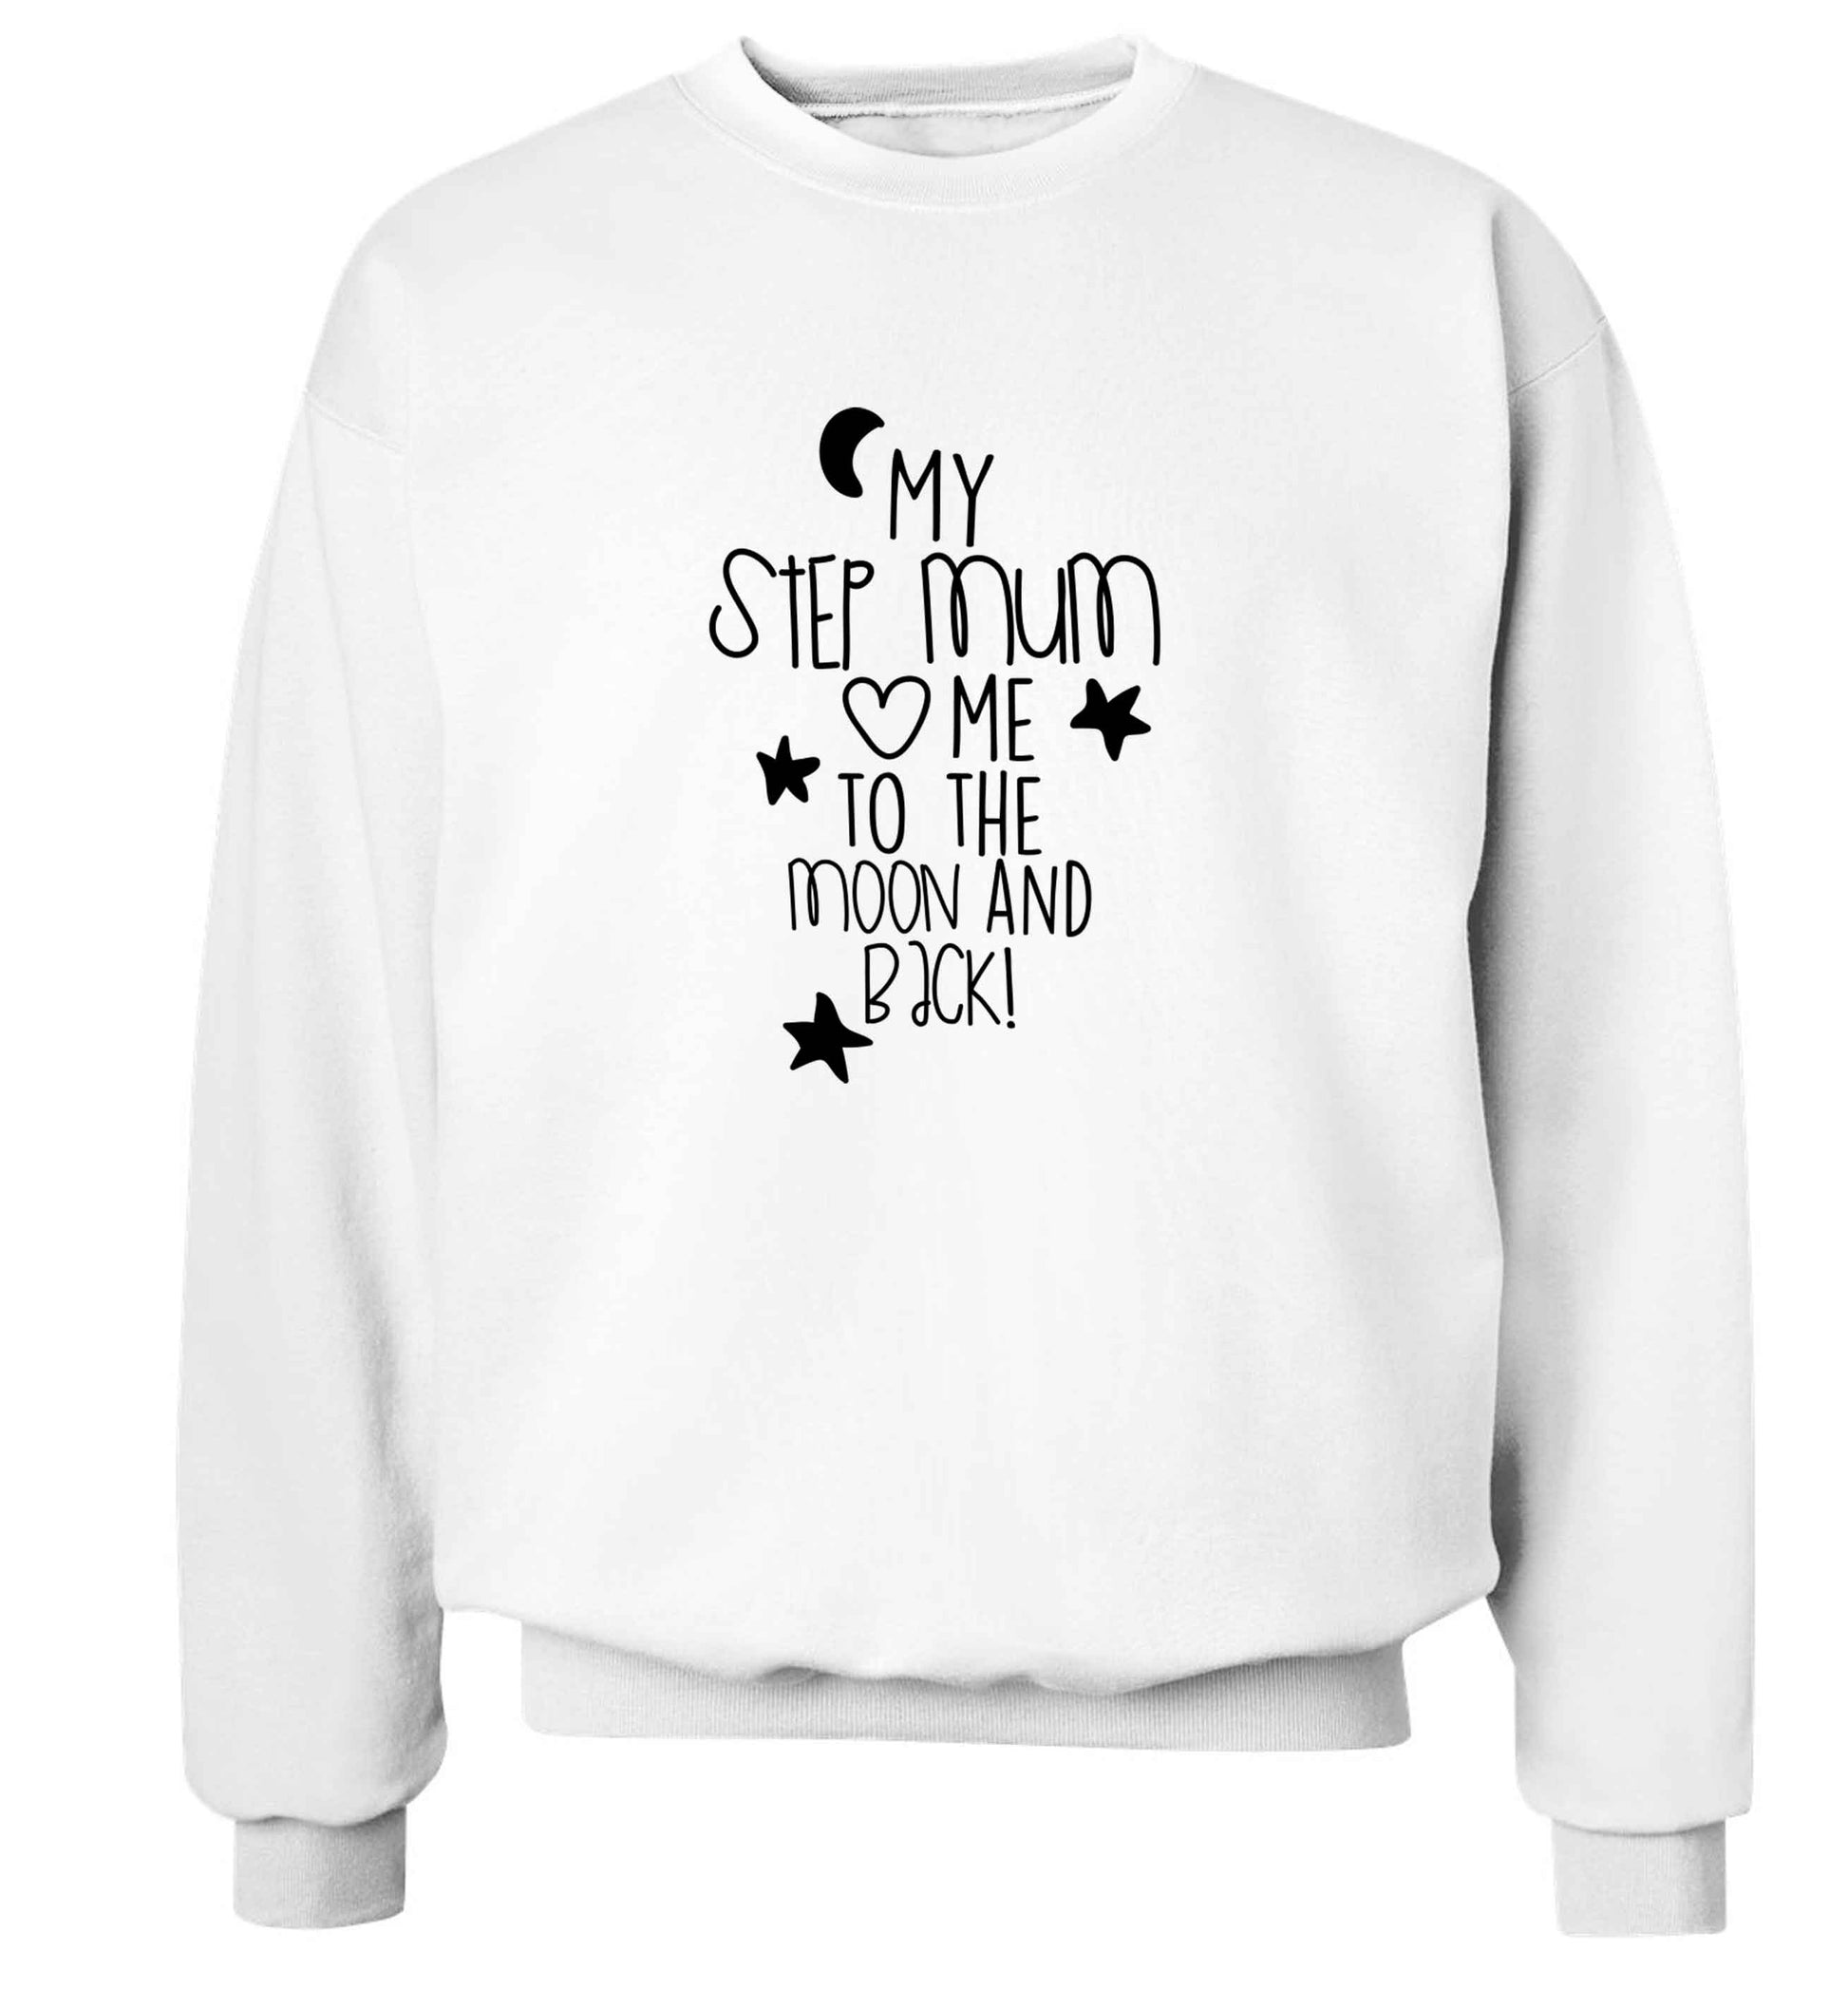 My step-mum loves me to the moon and back adult's unisex white sweater 2XL